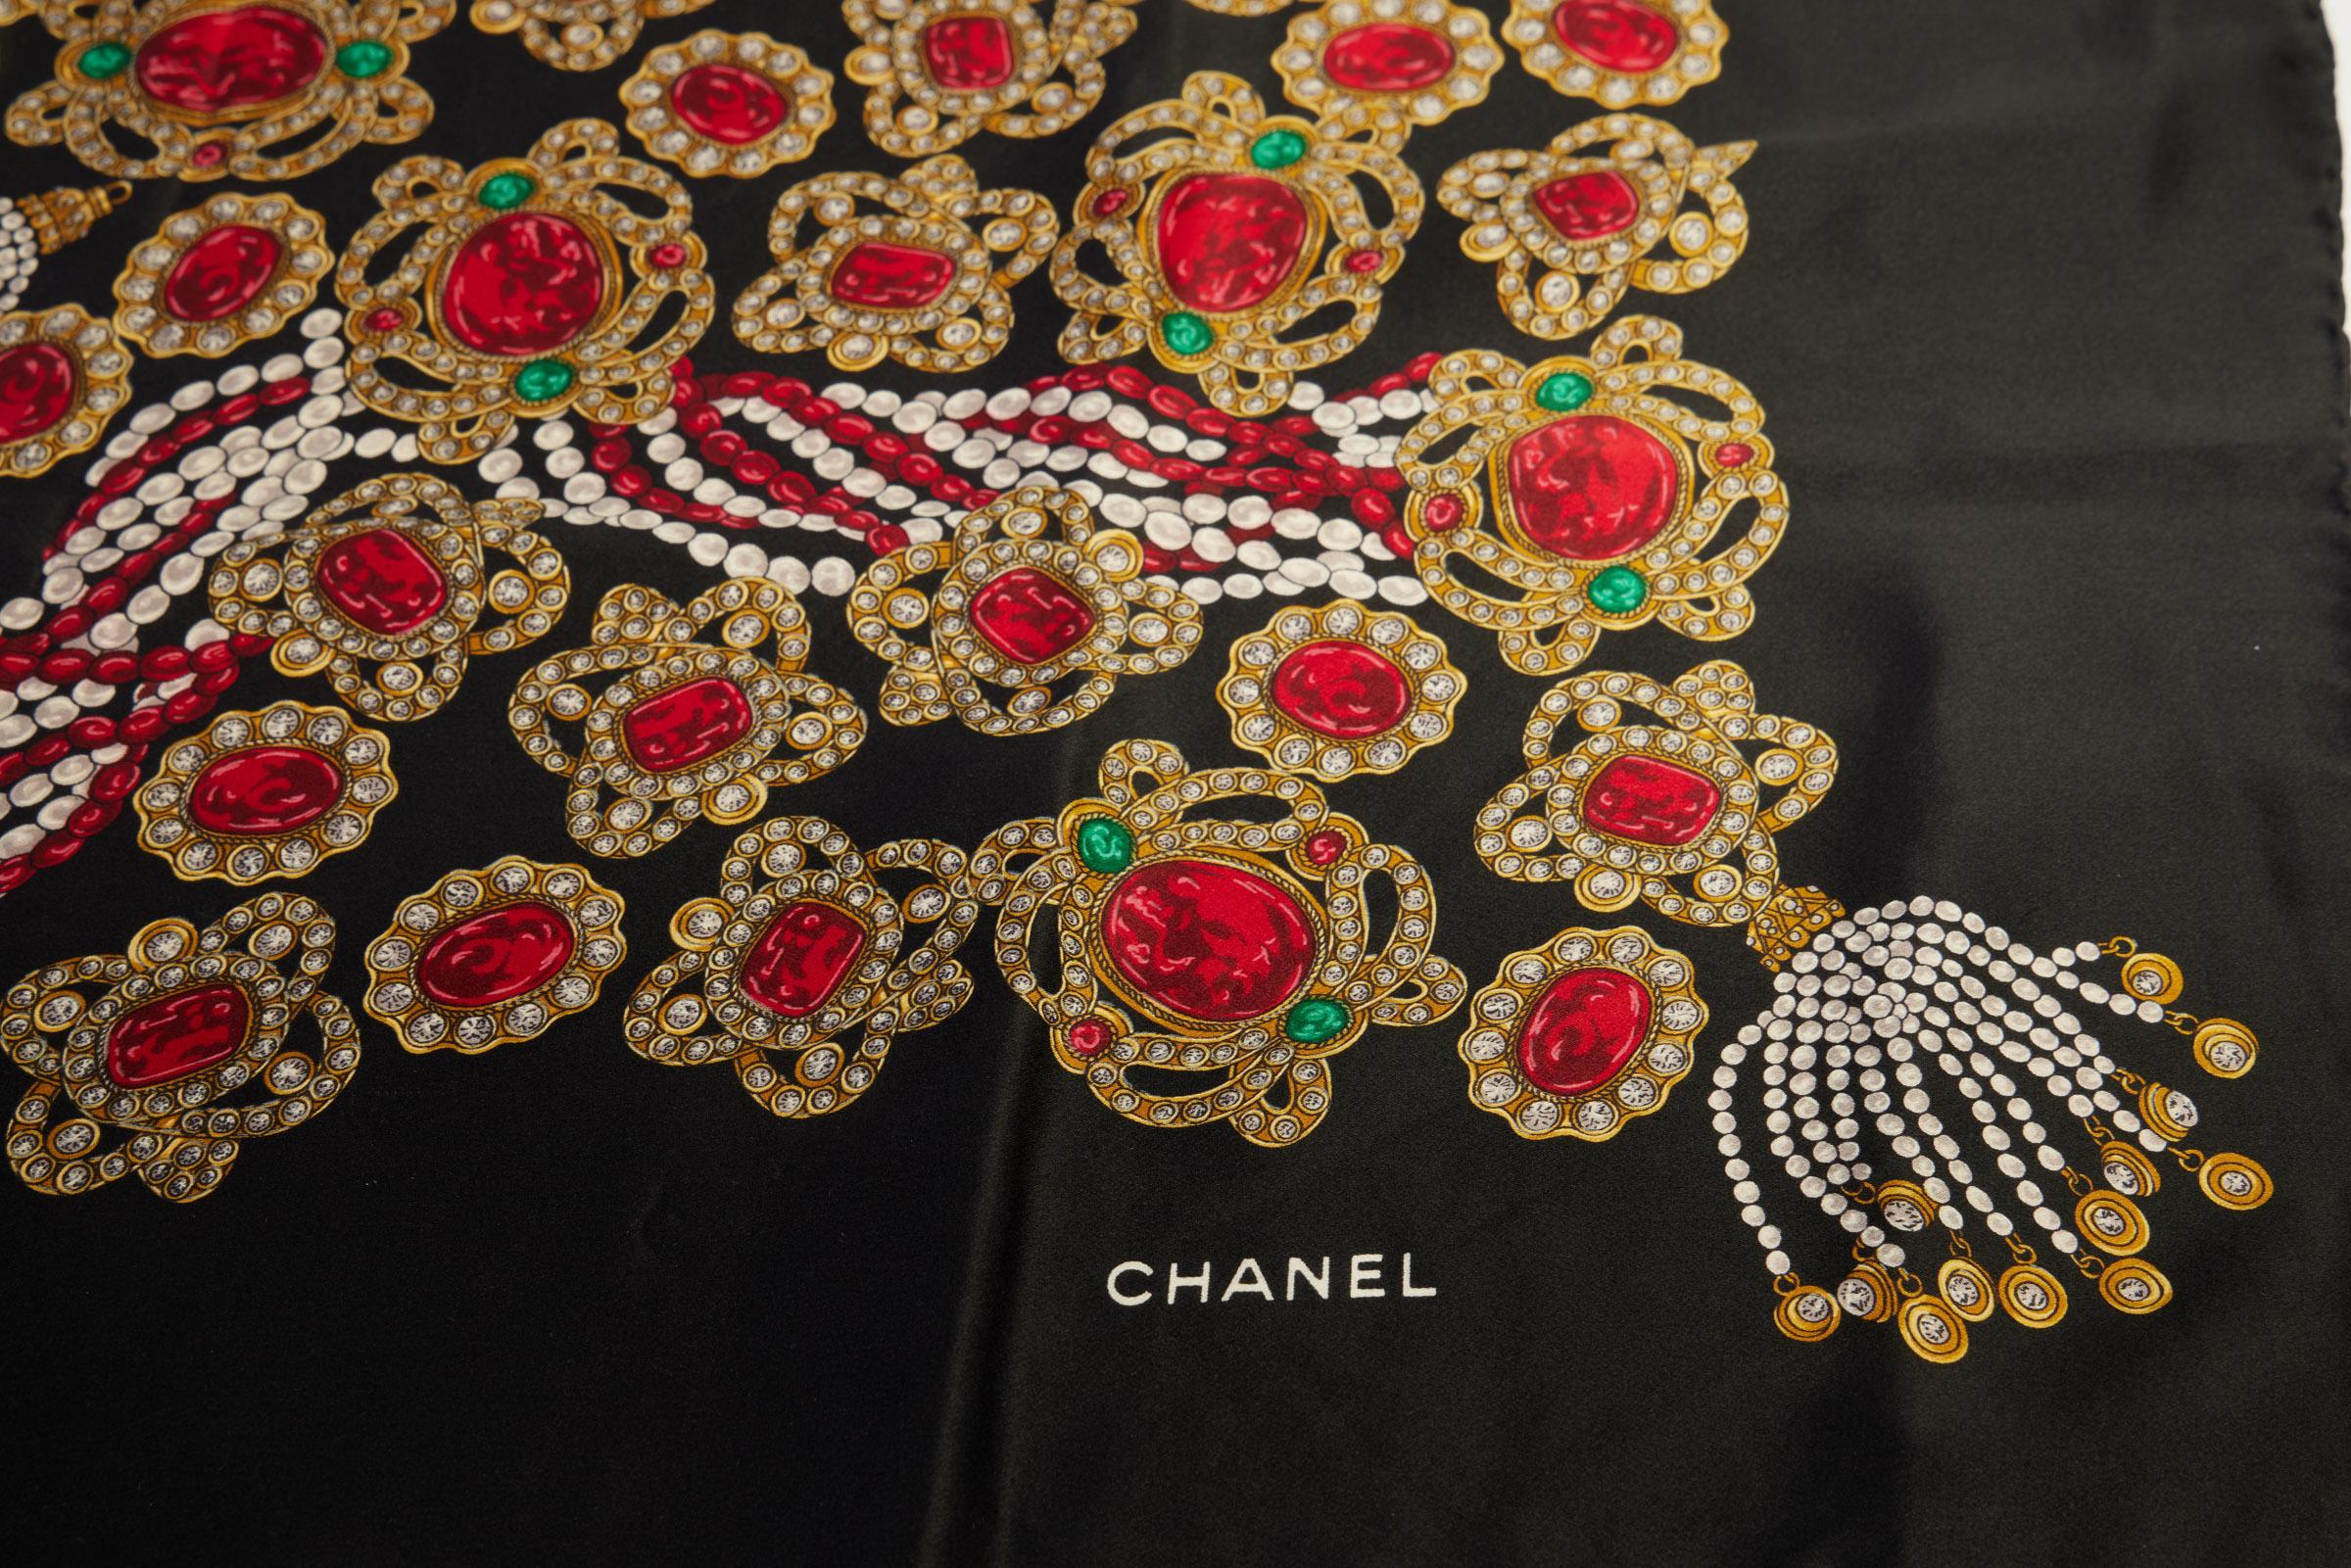 Chanel vintage black silk scarf with gripoix jewelry design. Hand rolled edges.